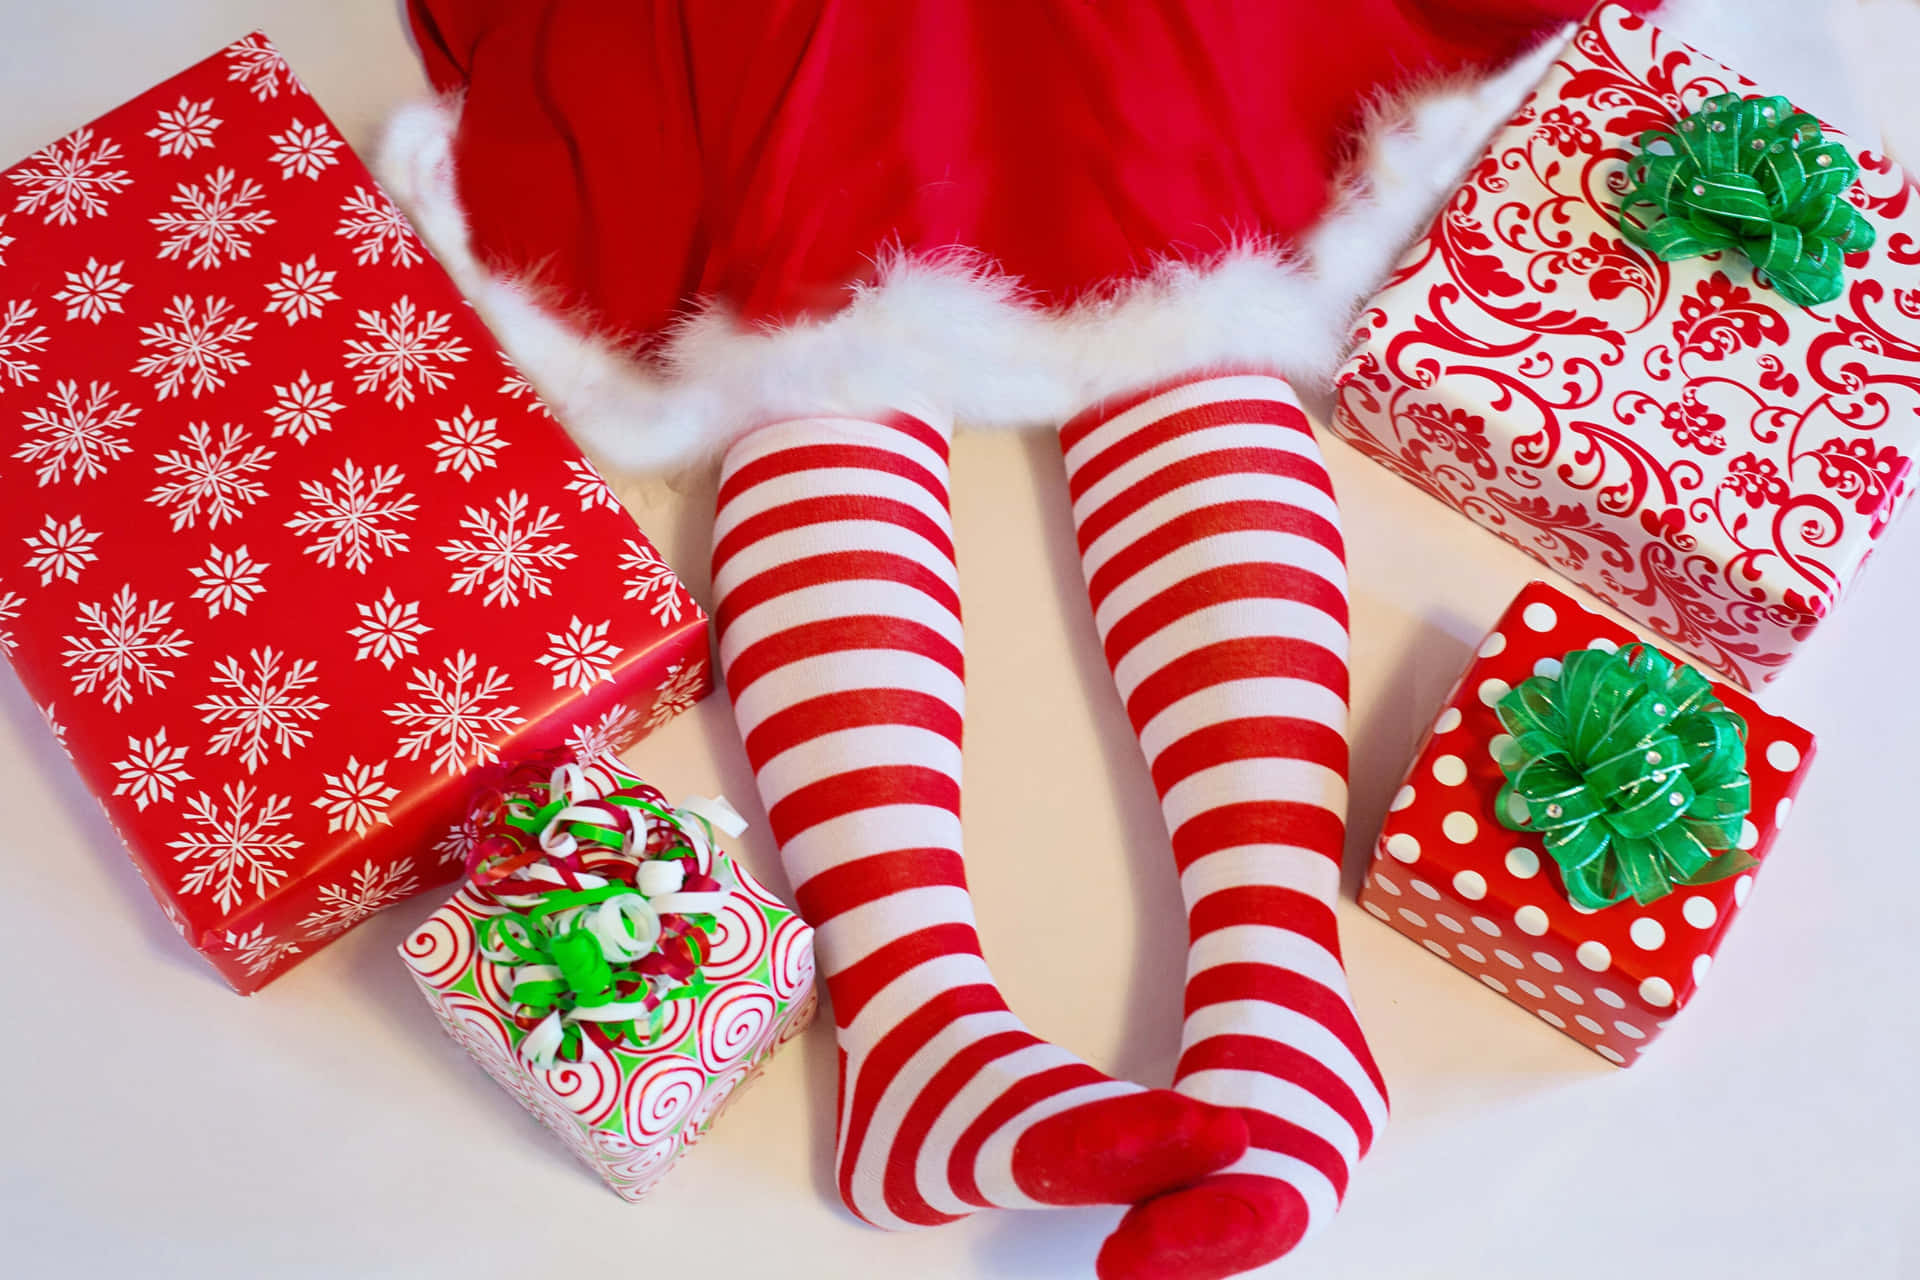 Santa Striped Legs With Gifts.jpg Background